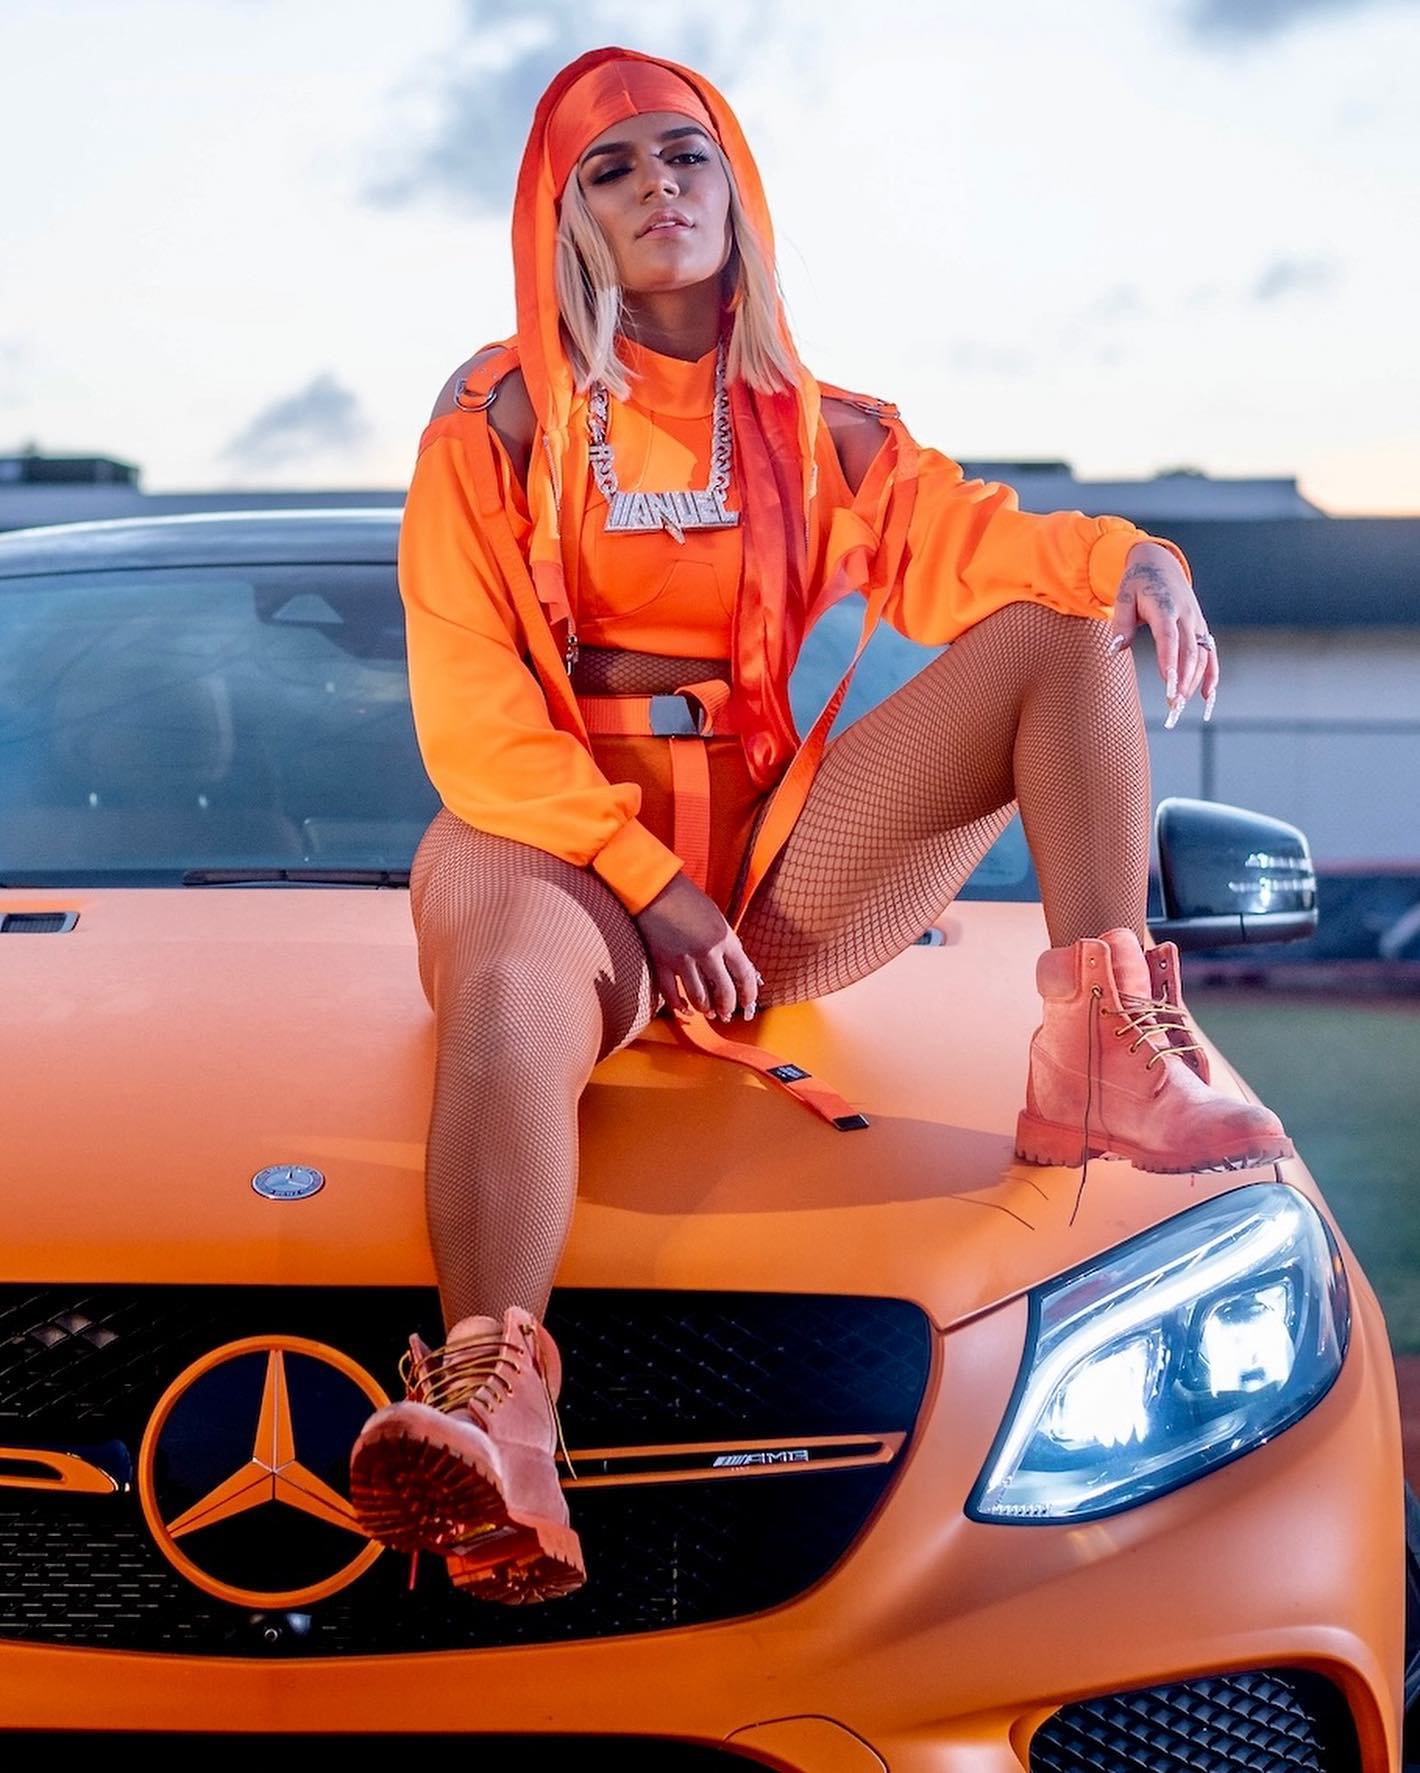 Louis Vuitton Outfit Of Karol G In Follow Ft. Anuel AA (2020)